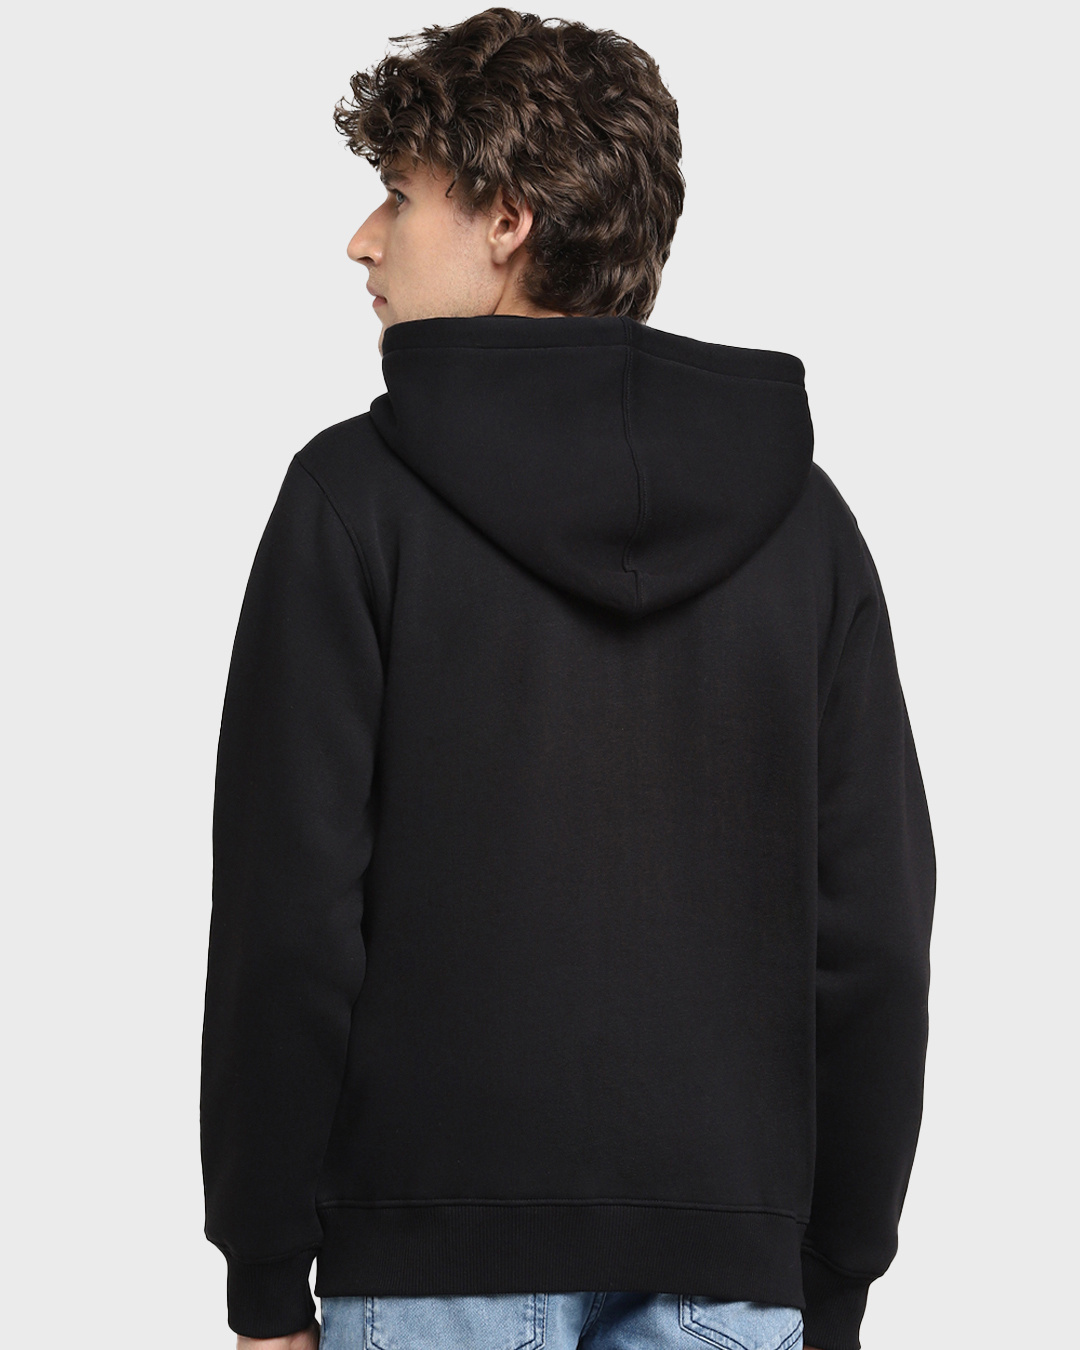 Shop Men's Black Mickey Faces Graphic Printed Zipper Hoodie-Back